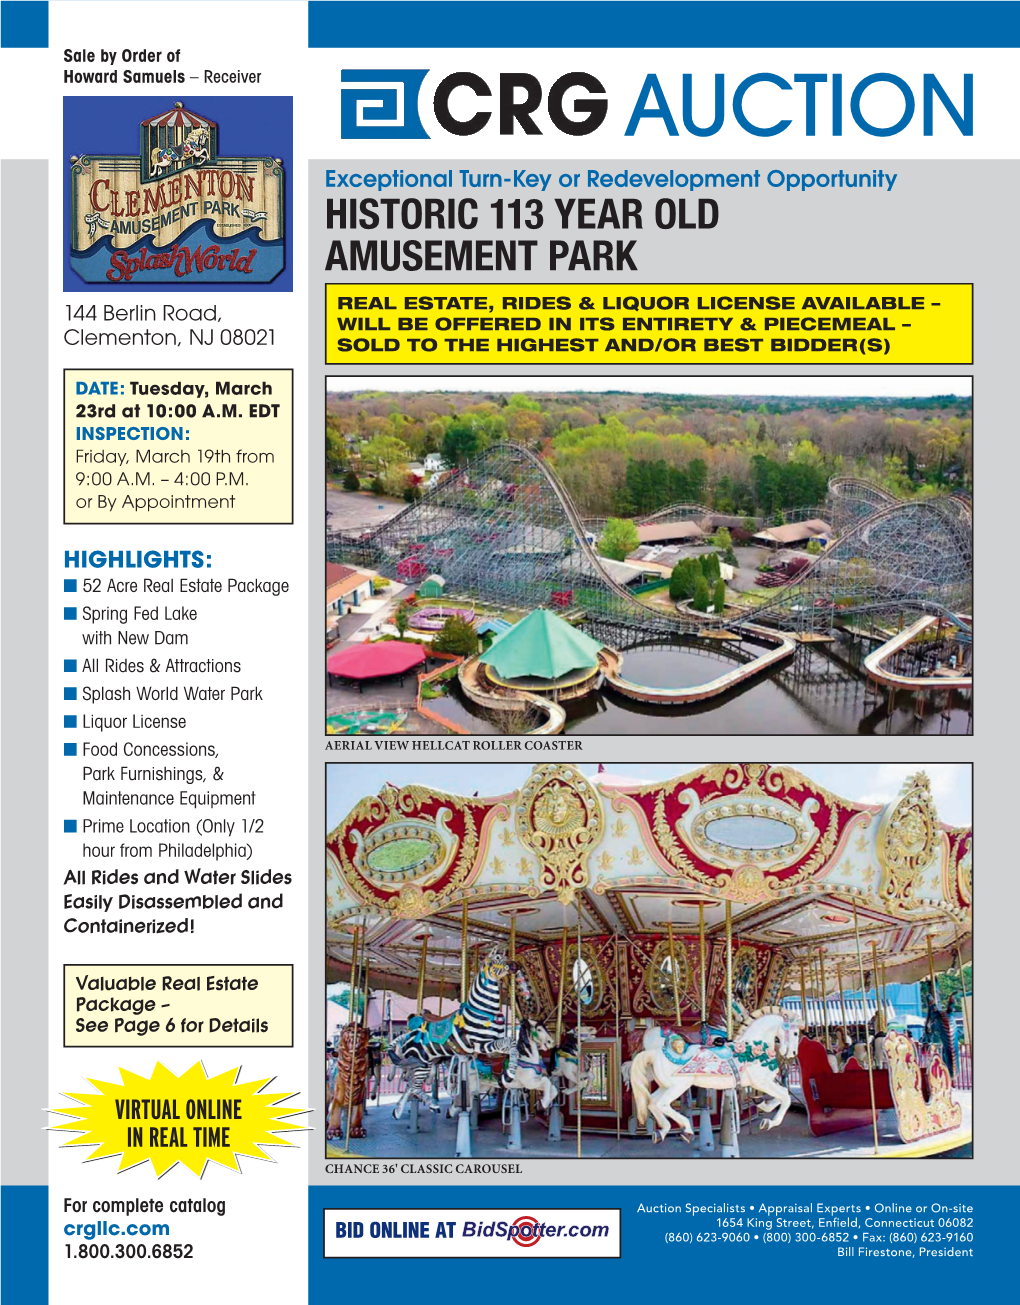 AUCTION Exceptional Turn-Key Or Redevelopment Opportunity HISTORIC 113 YEAR OLD AMUSEMENT PARK